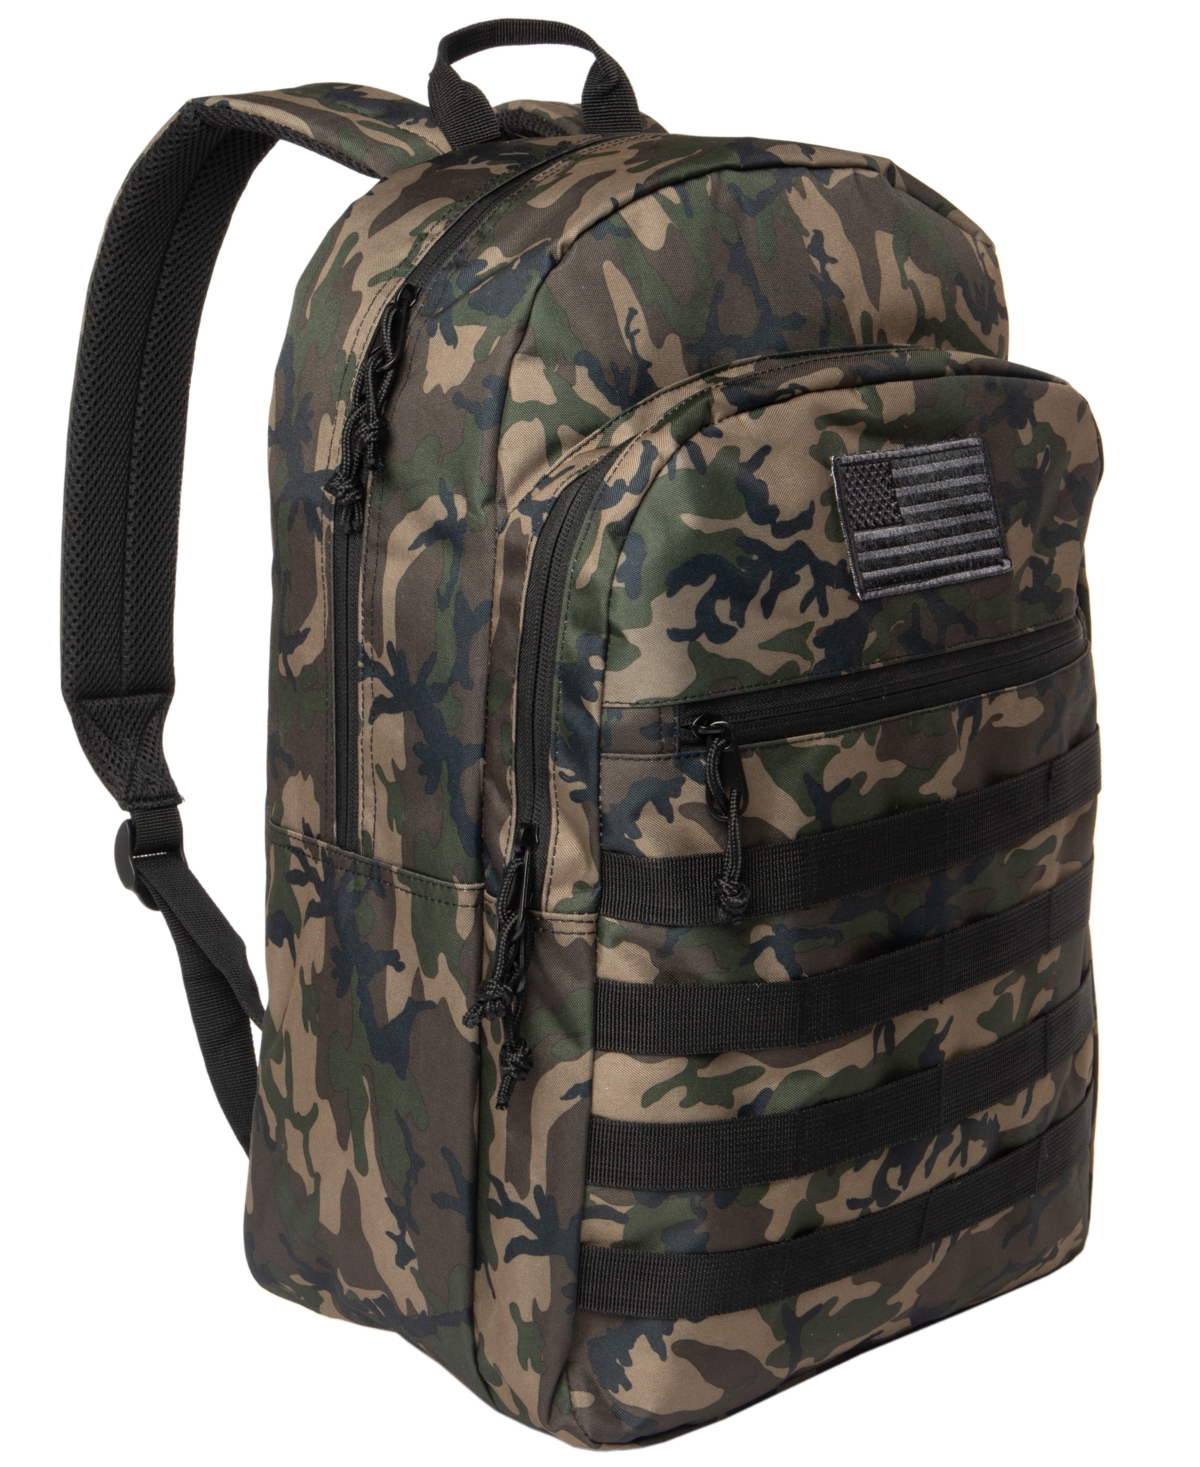 Men's Recon Tactical Backpack - Traditional Camo